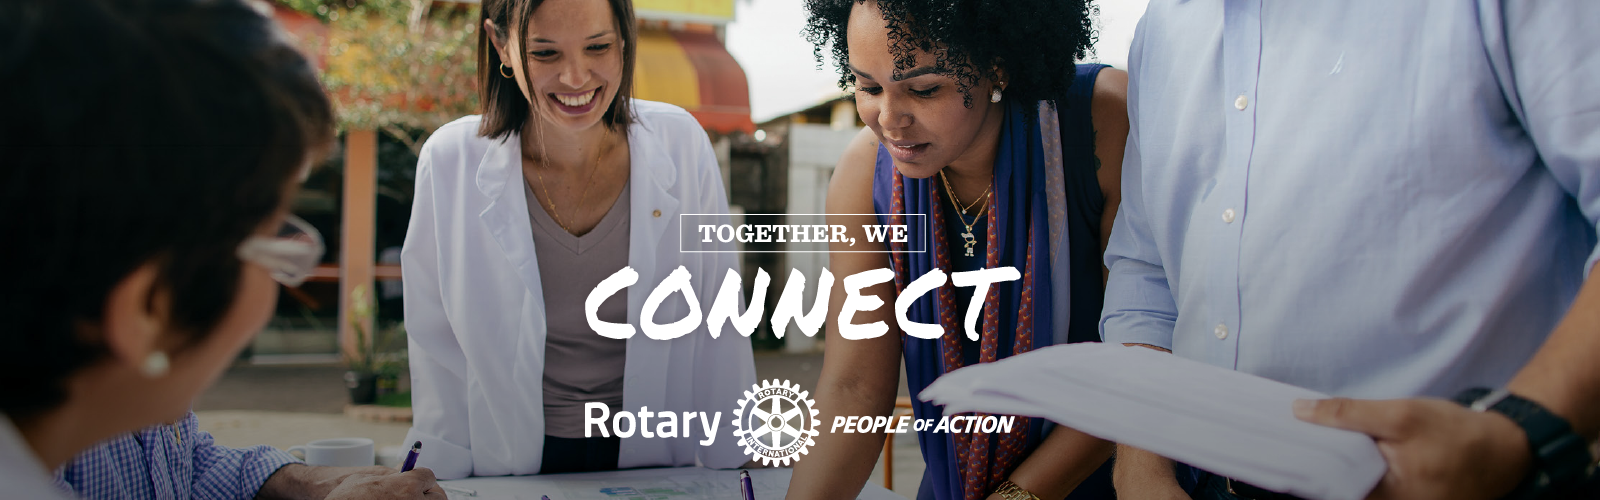 WHAT IS ROTARY